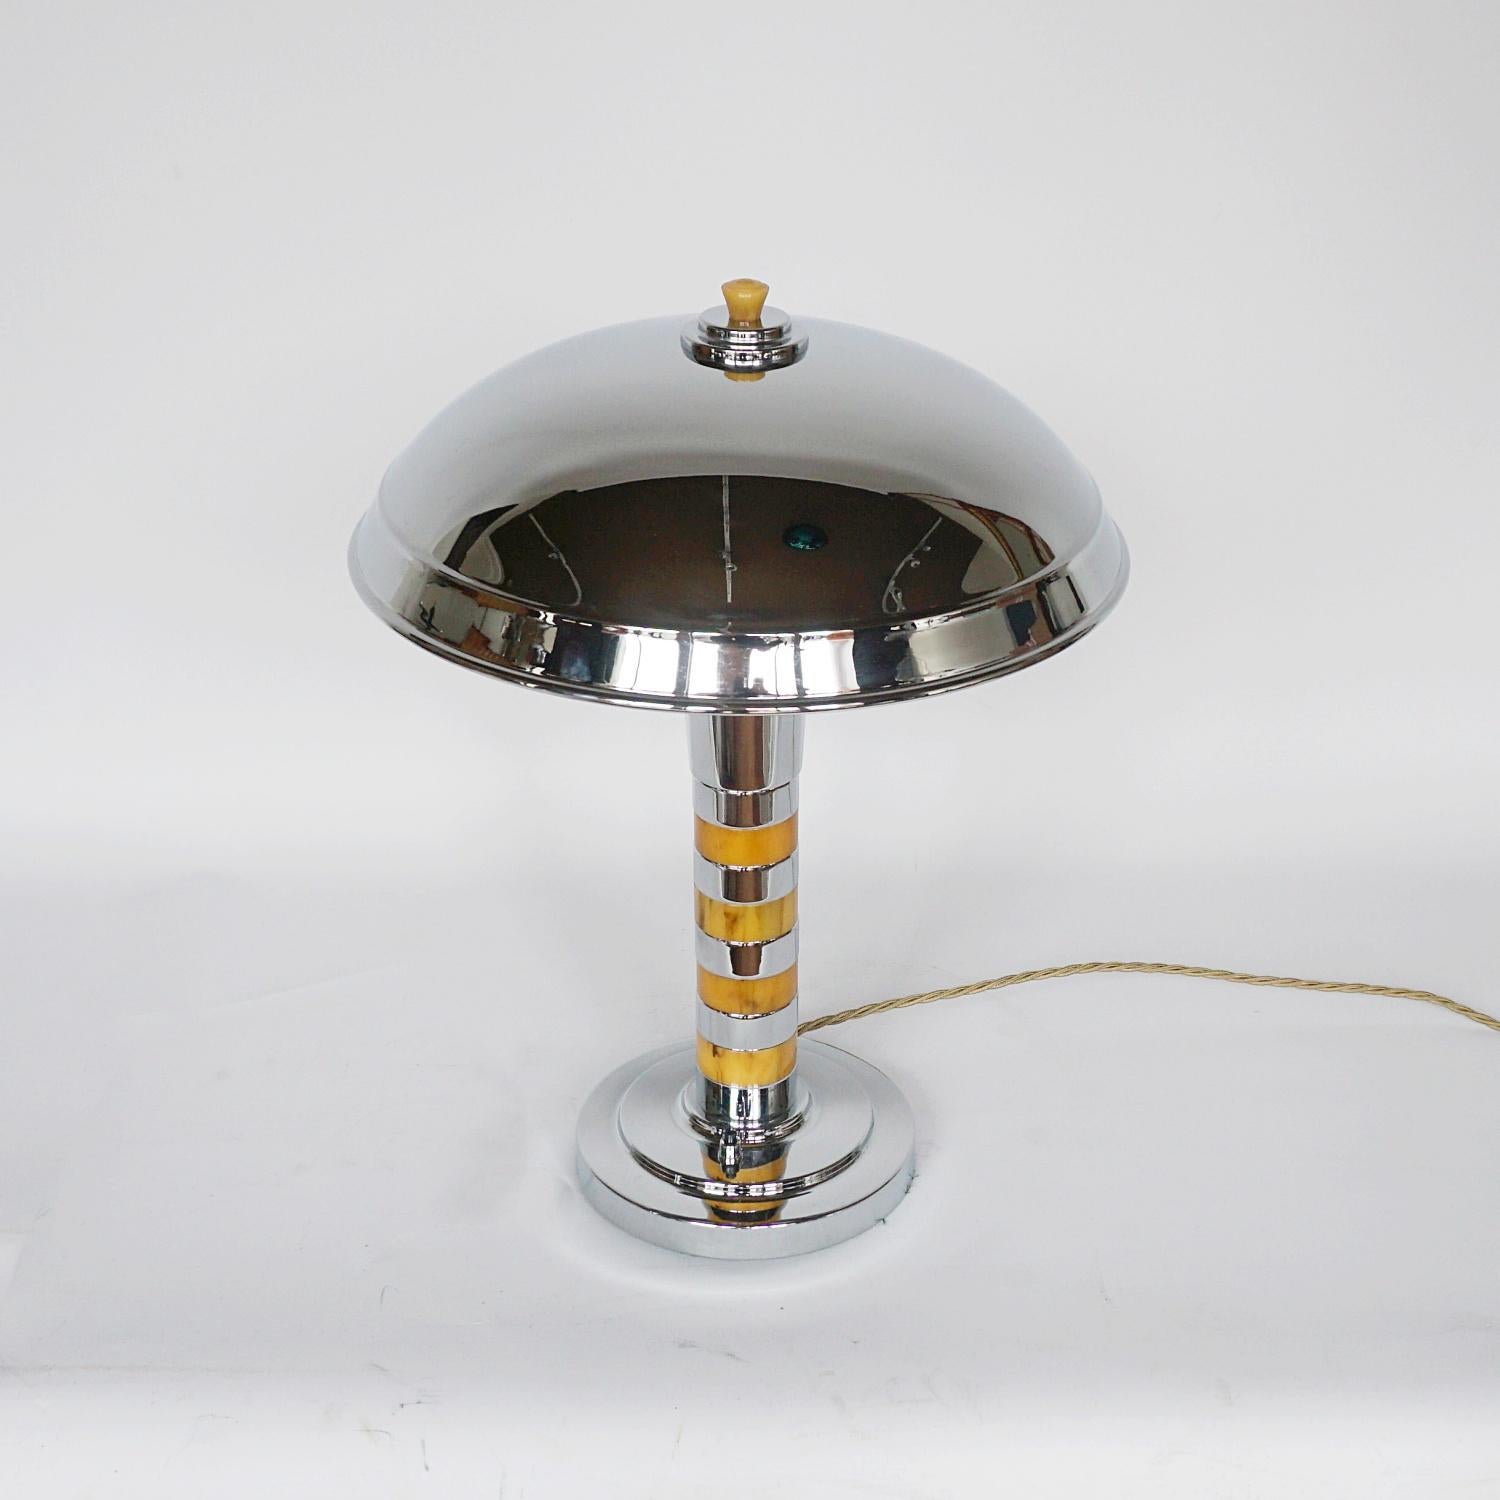 Art Deco Bakelite and Chromed Metal Dome Lamp In Good Condition For Sale In Forest Row, East Sussex